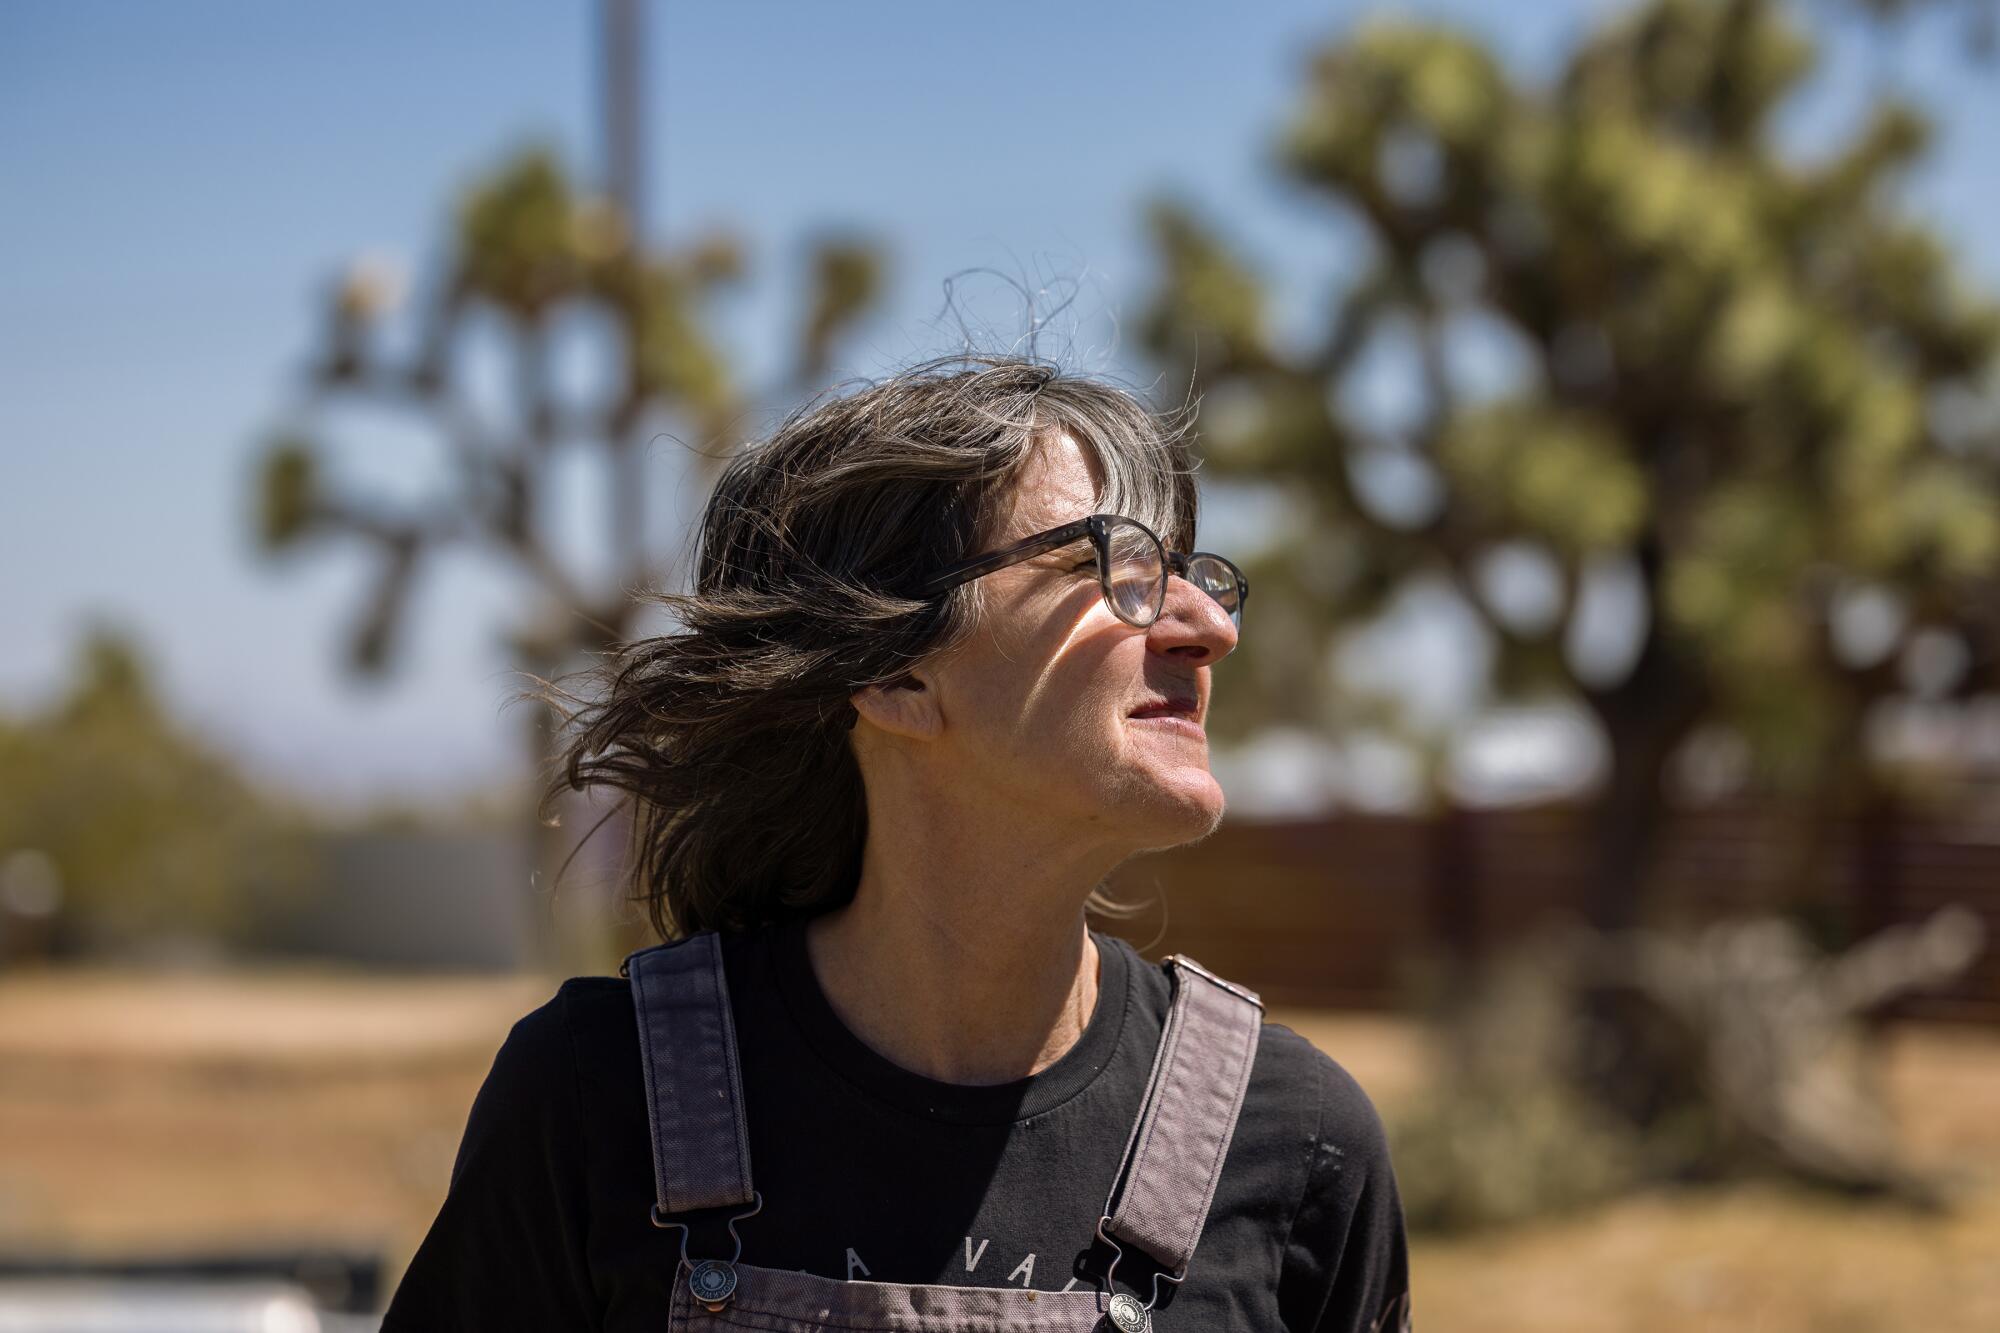 Heidi Schwegler, wearing glasses and overalls, looks right as she poses in front of Joshua trees.